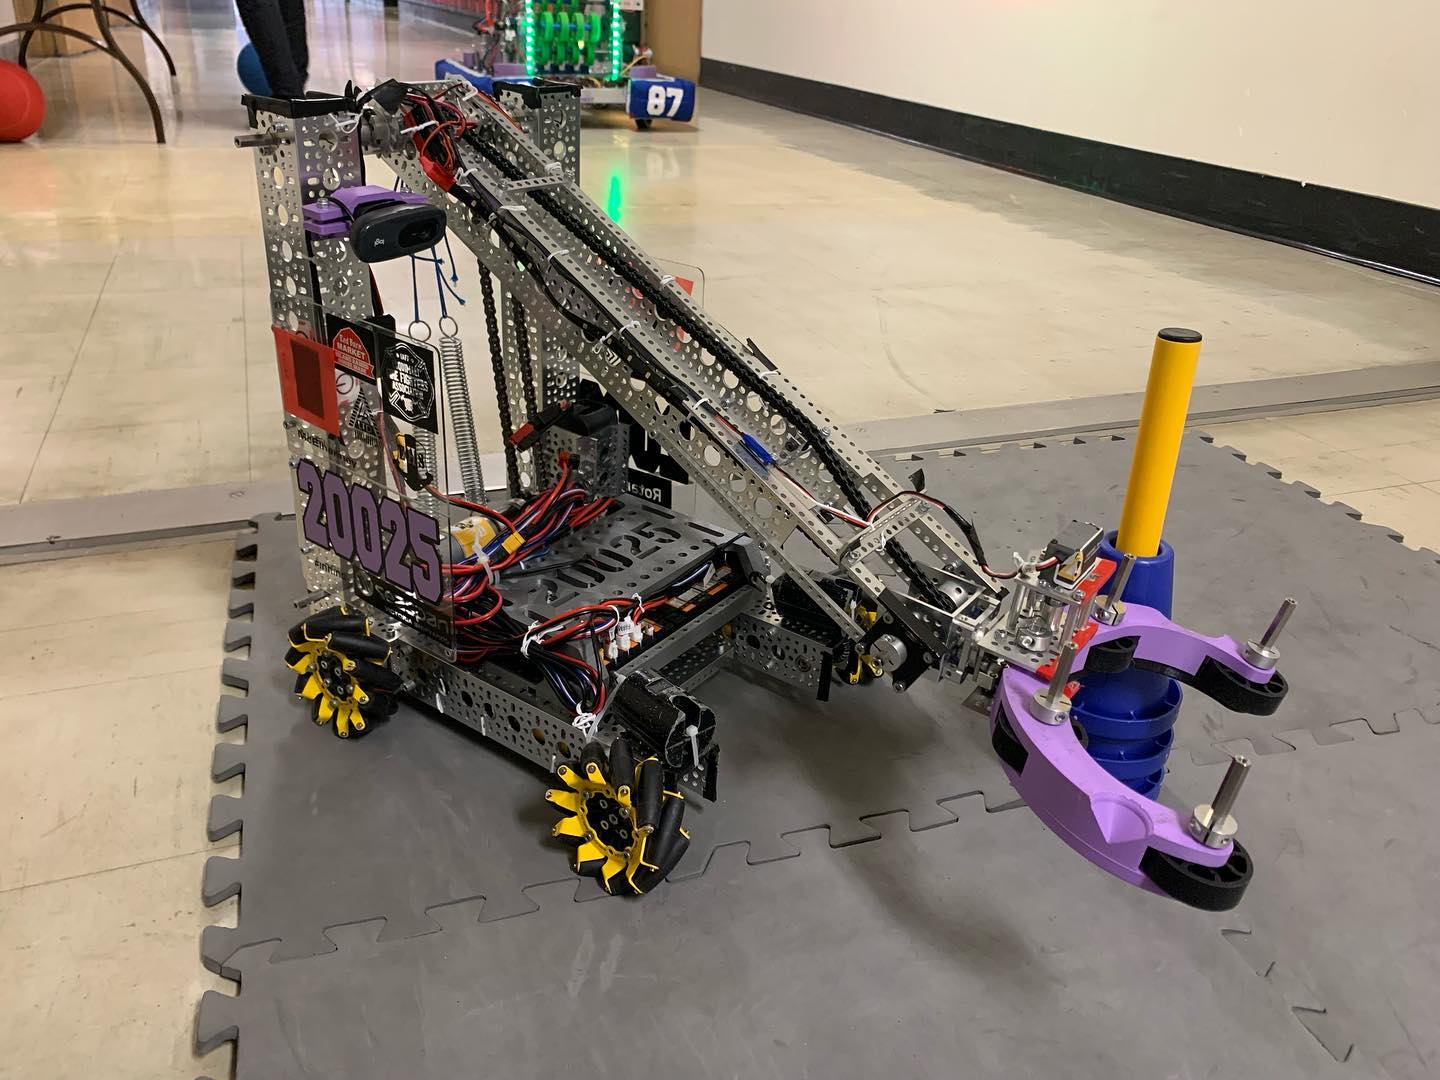 Yesterday we went down to @esquimalthighschool to check out the @esquimaltatomsmashers open house and see their robots up close. Amazing amount of work goes into these by the students. #roboticsclub #firstrobotics #esquimalt